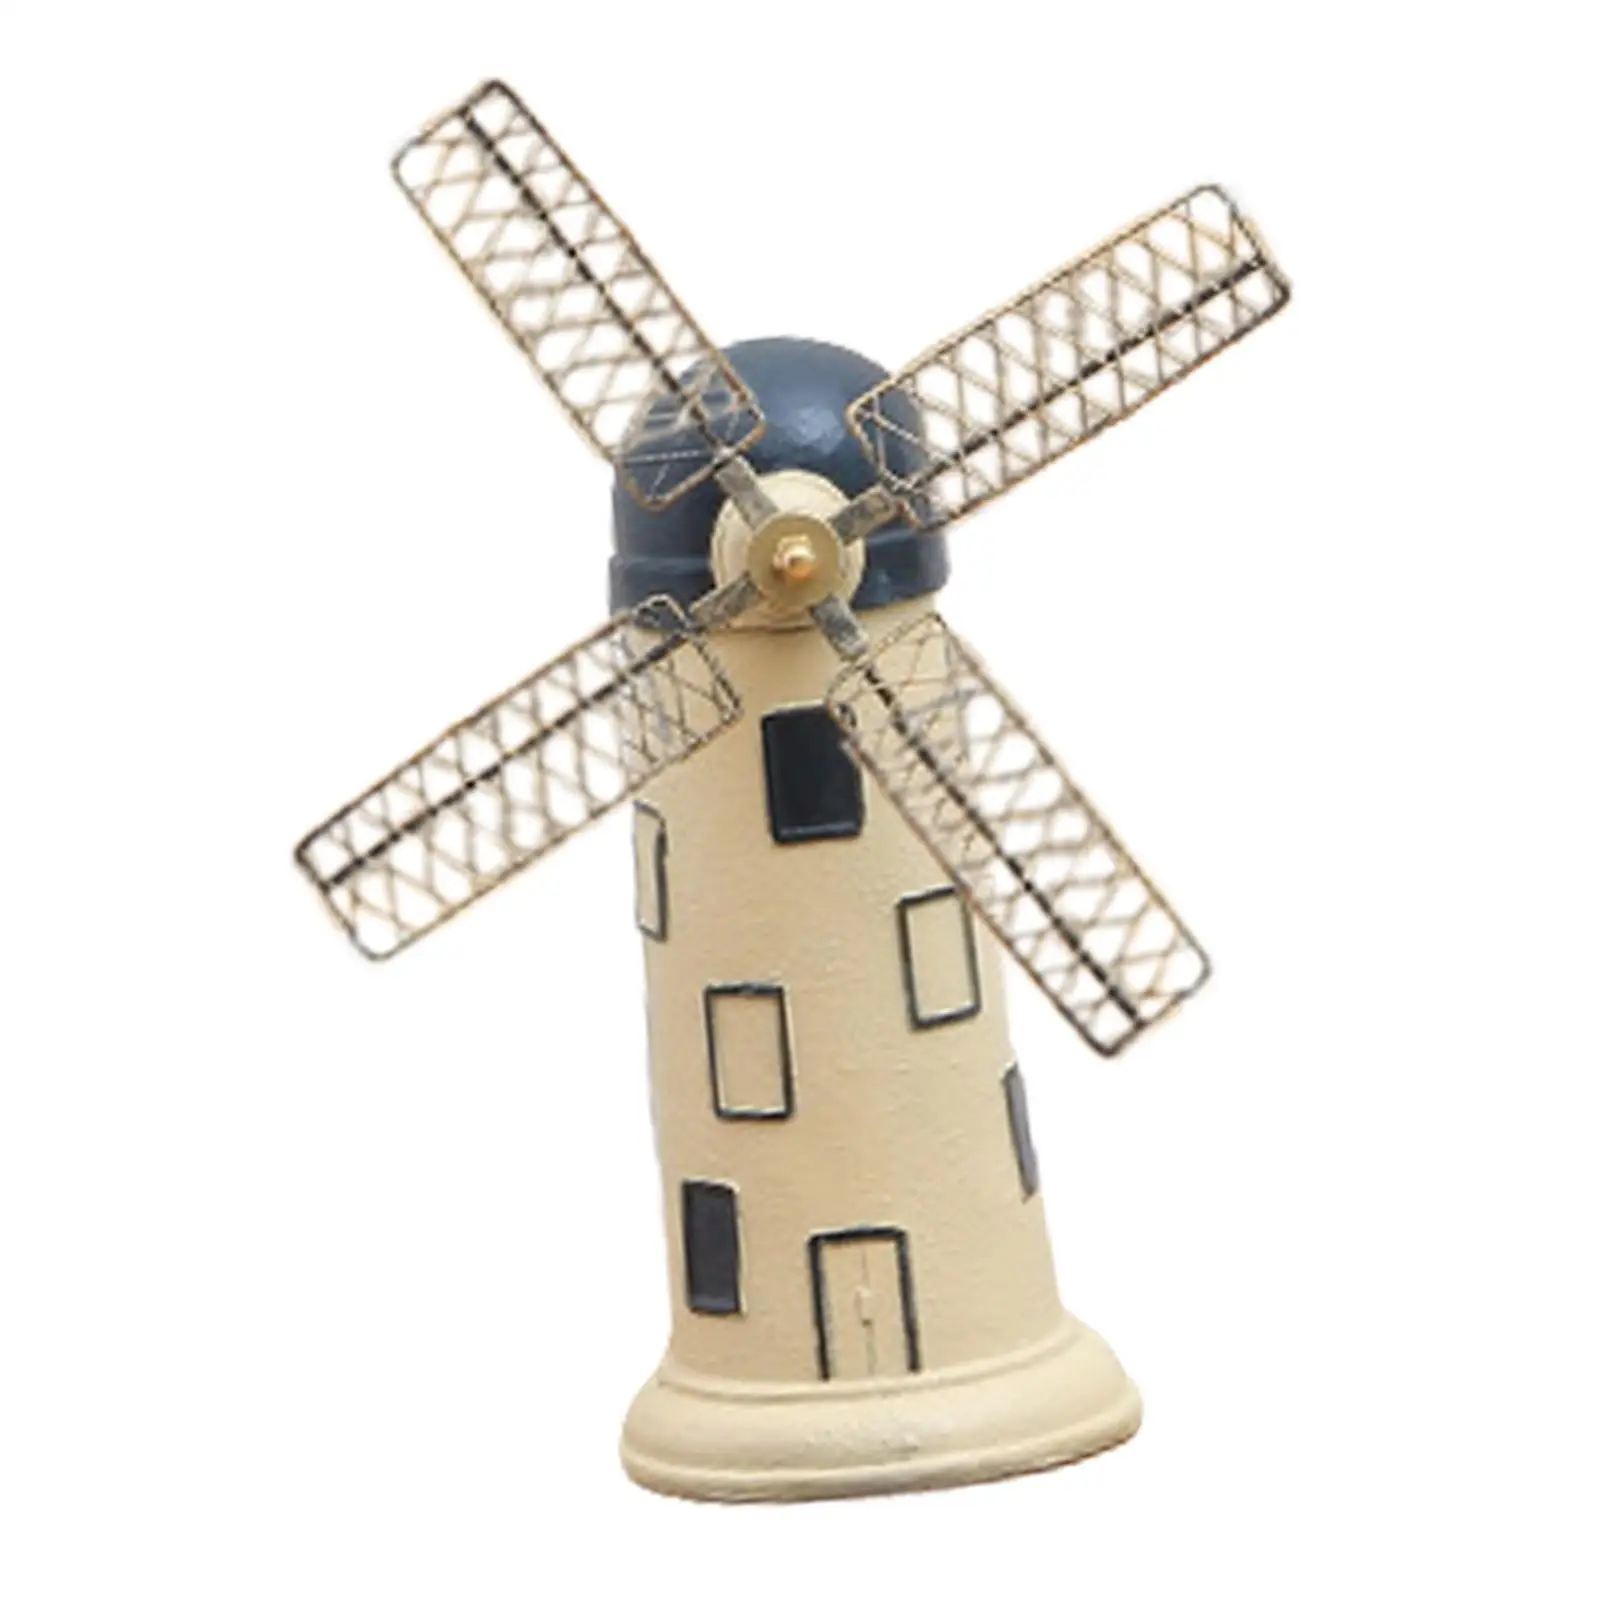 Windmill Phonograph Model Display Ornaments Decorative Classic Resin Crafts for Living Room Tabletop Table Holiday Gifts